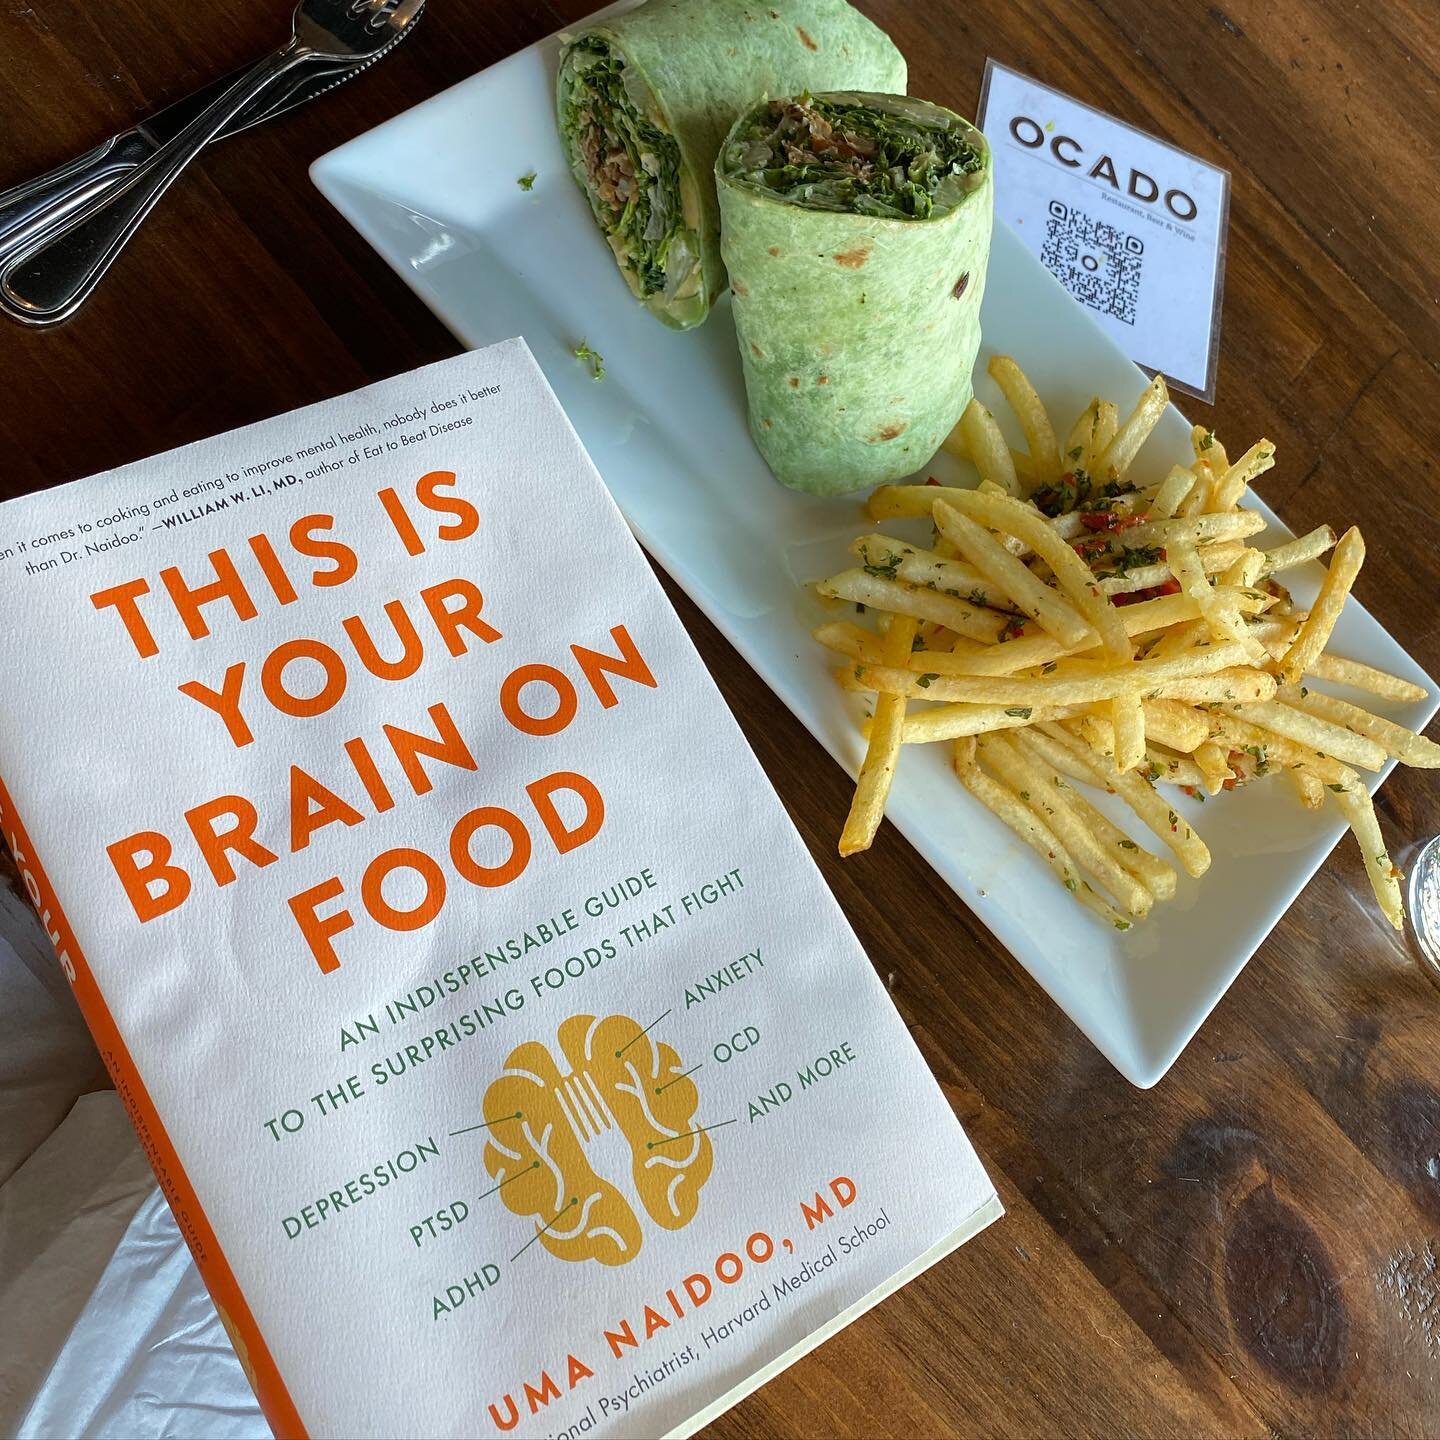 More fascinating studies about nutrition and mental health. A solid book (and restaurant) recommendation from me. 

. . . . . . . . . #food #fit #focus #foodfitfocus #nutrition #fitness #happiness #personaltrainer #healthcoach #plantbased #plantpower